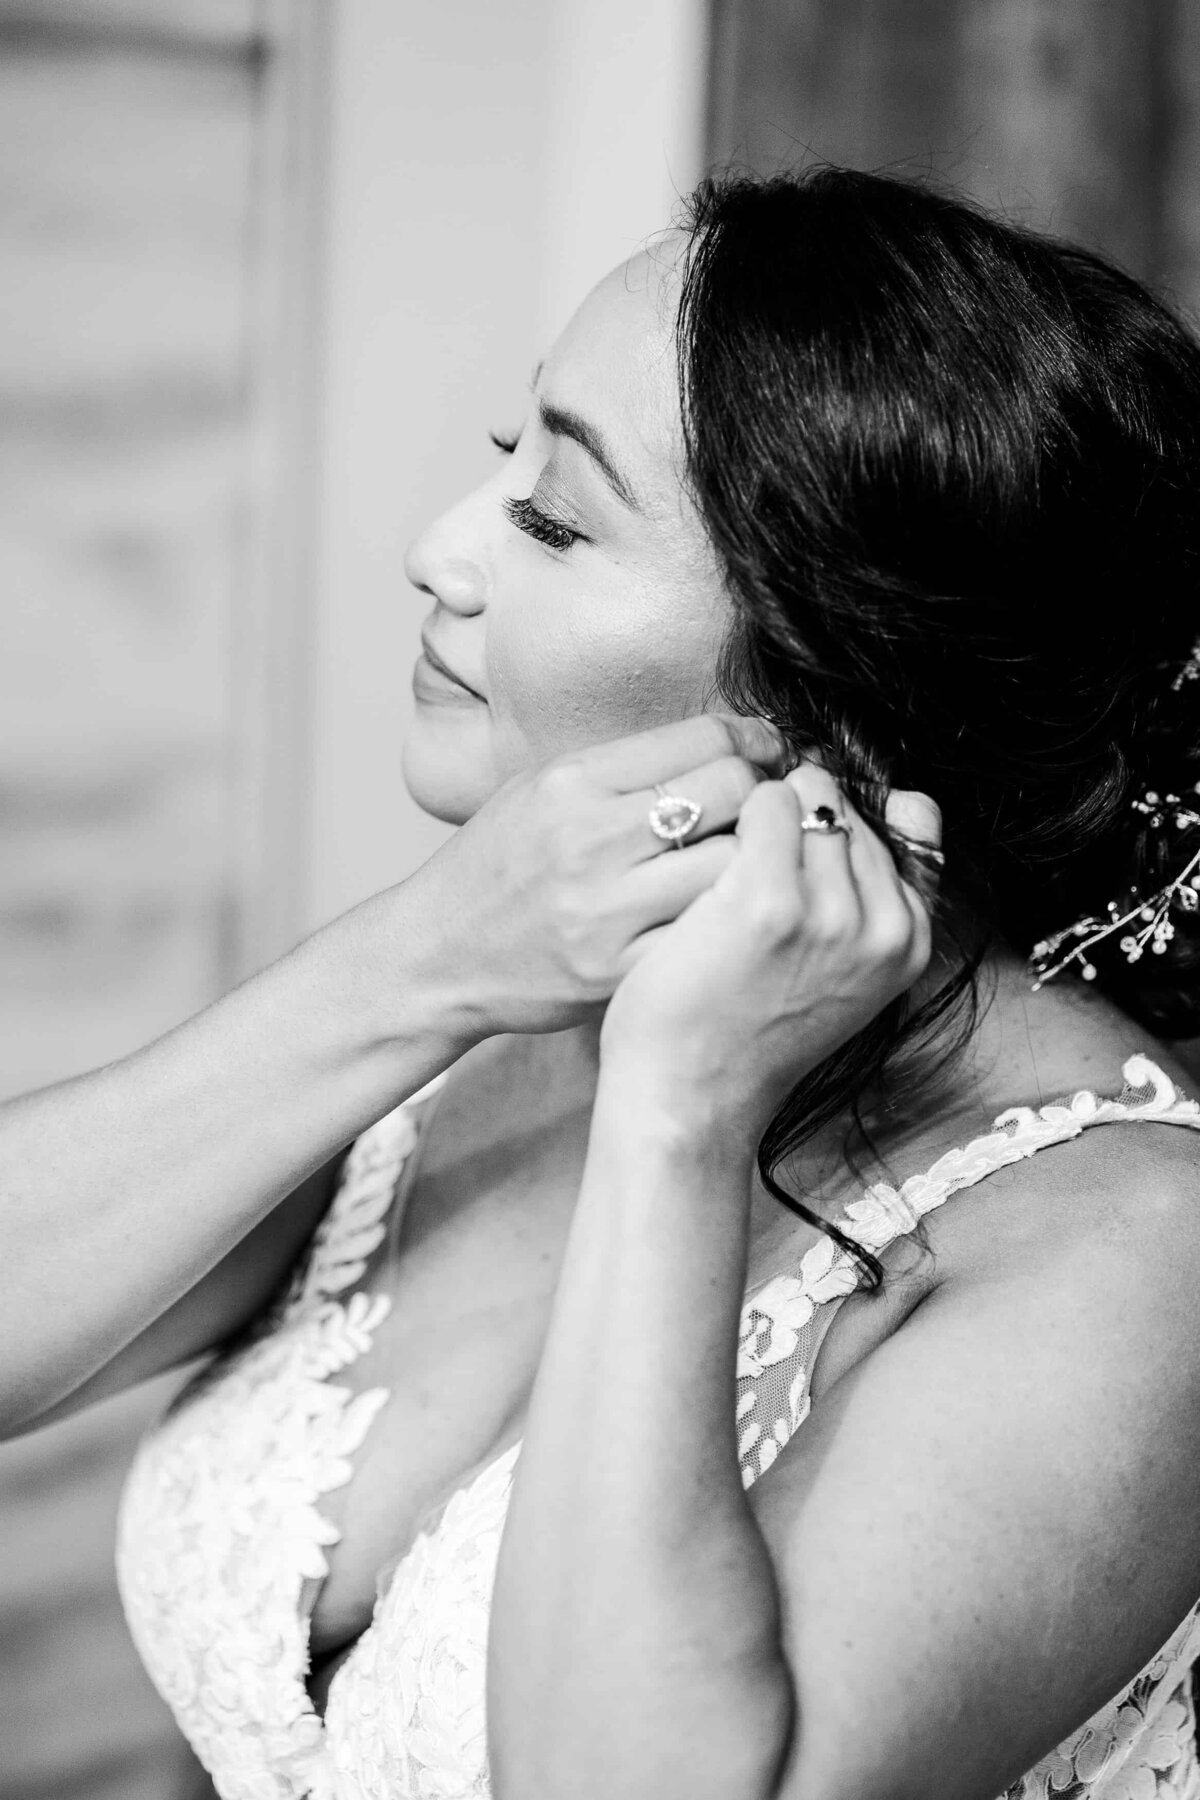 Bride, putting on her earrings in anticipation of the wedding ceremony